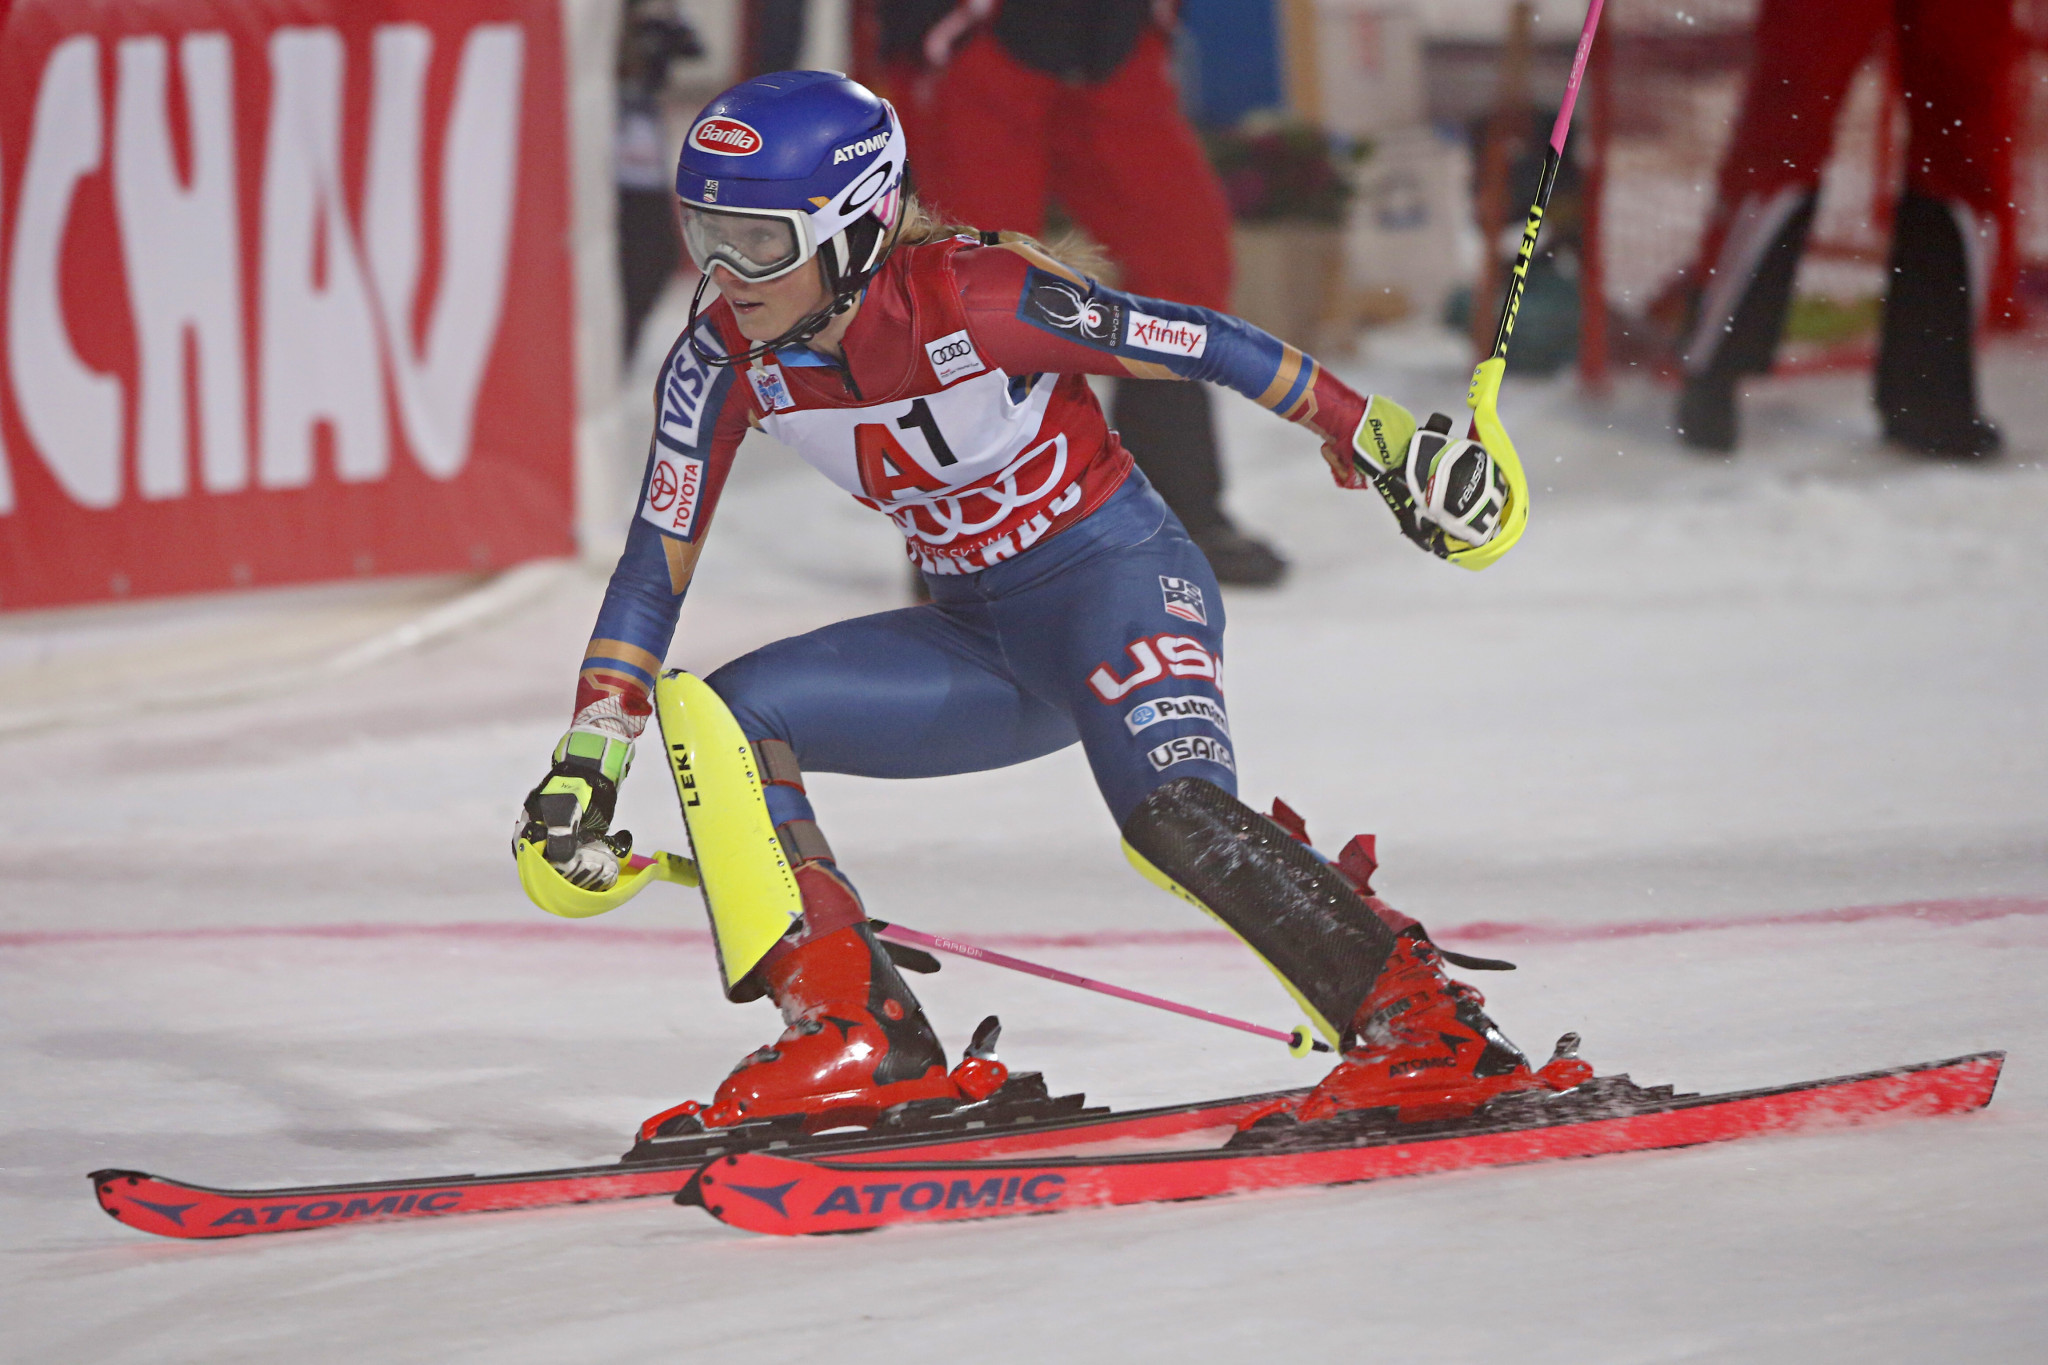 Shiffrin has now won her last five World Cup events ©Getty Images